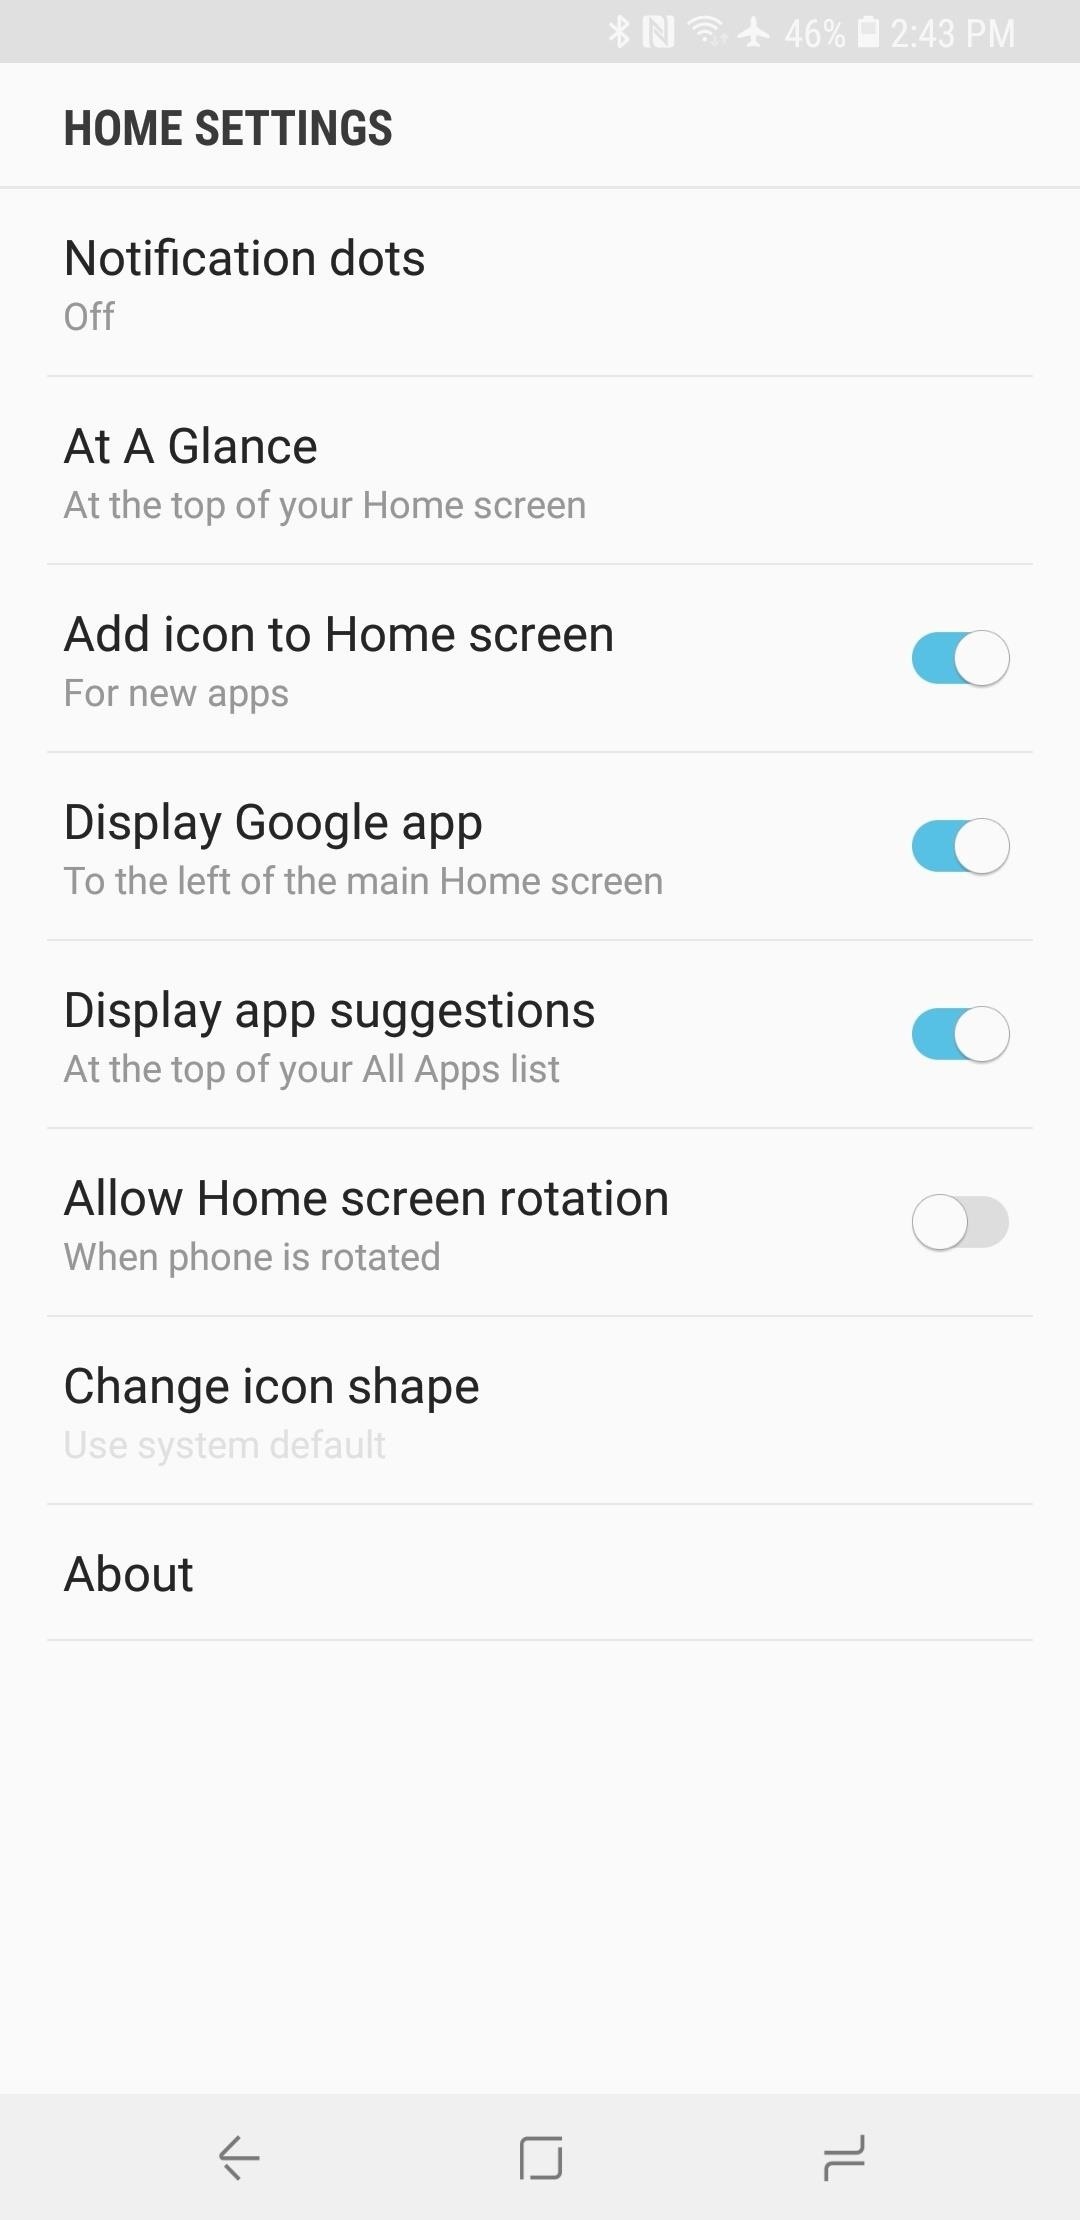 How to Get the New Pixel Launcher from Android 9.0 Pie on Any Phone — No Root Needed